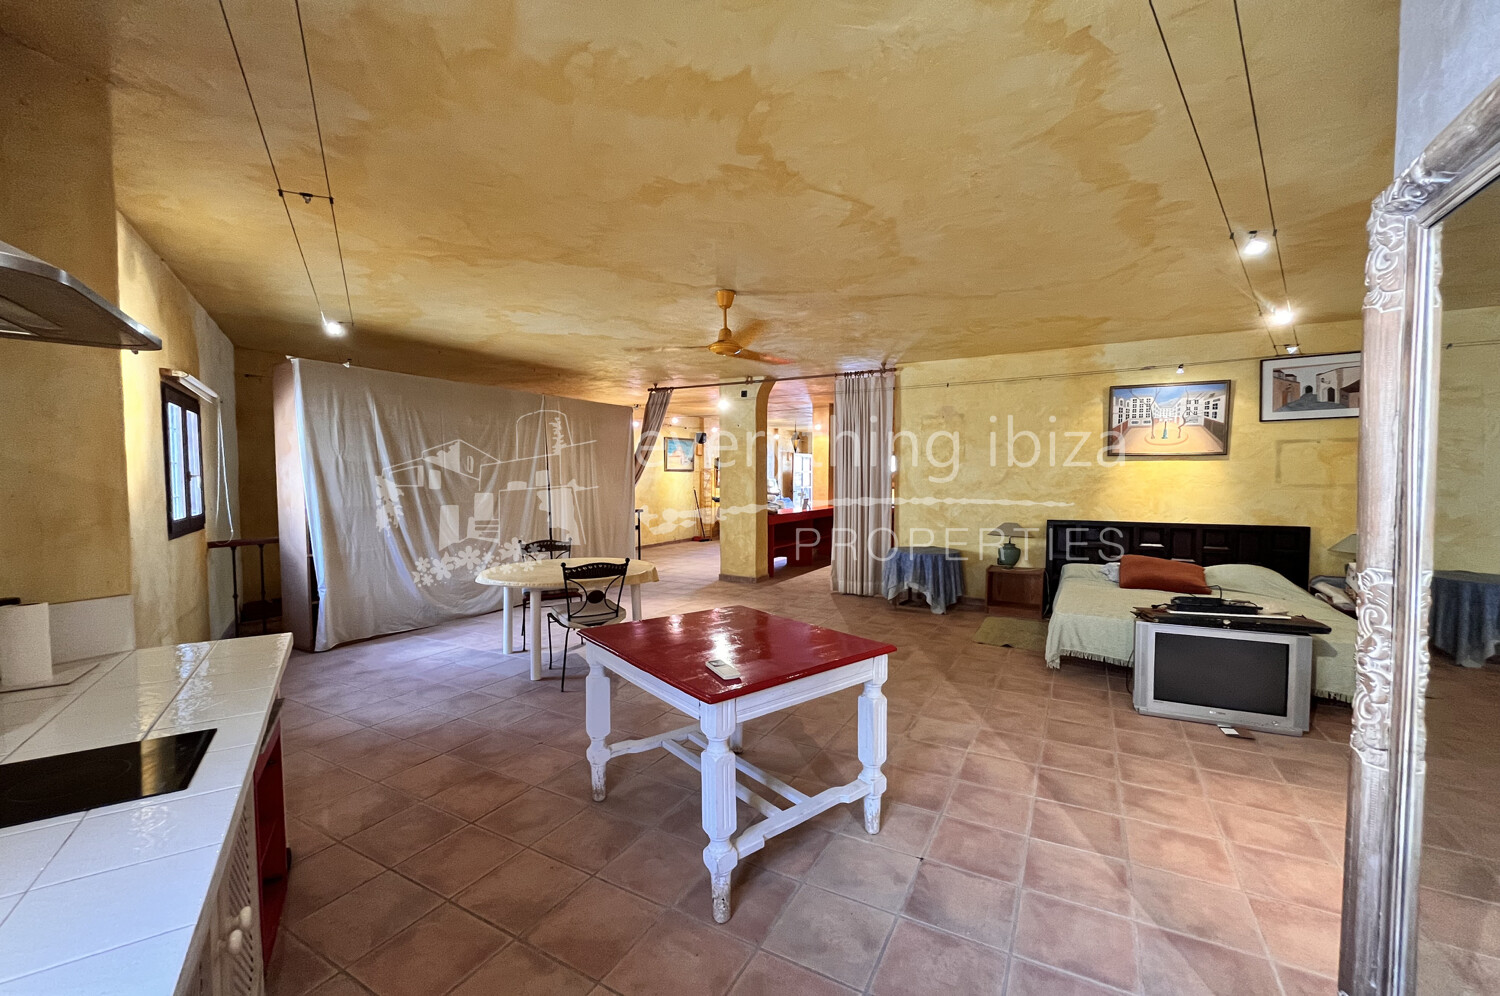 https://www.everythingibiza.com/properties/versatile-commer…of-san-jose-1640/,ref. 10, for sale in Ibiza by everything ibiza Properties